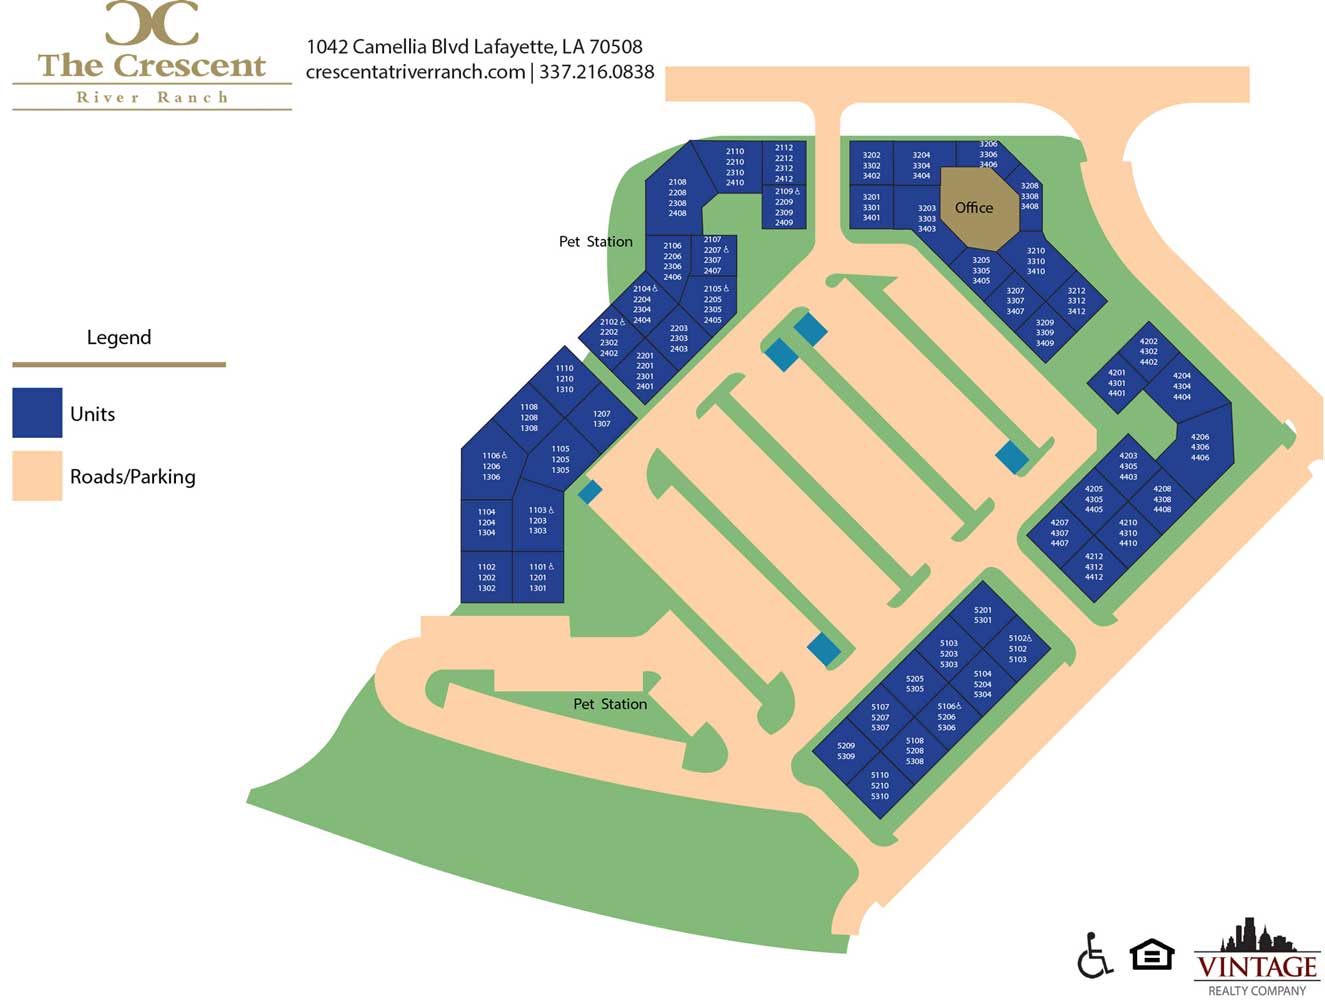 The Crescent at River Ranch Site Plan